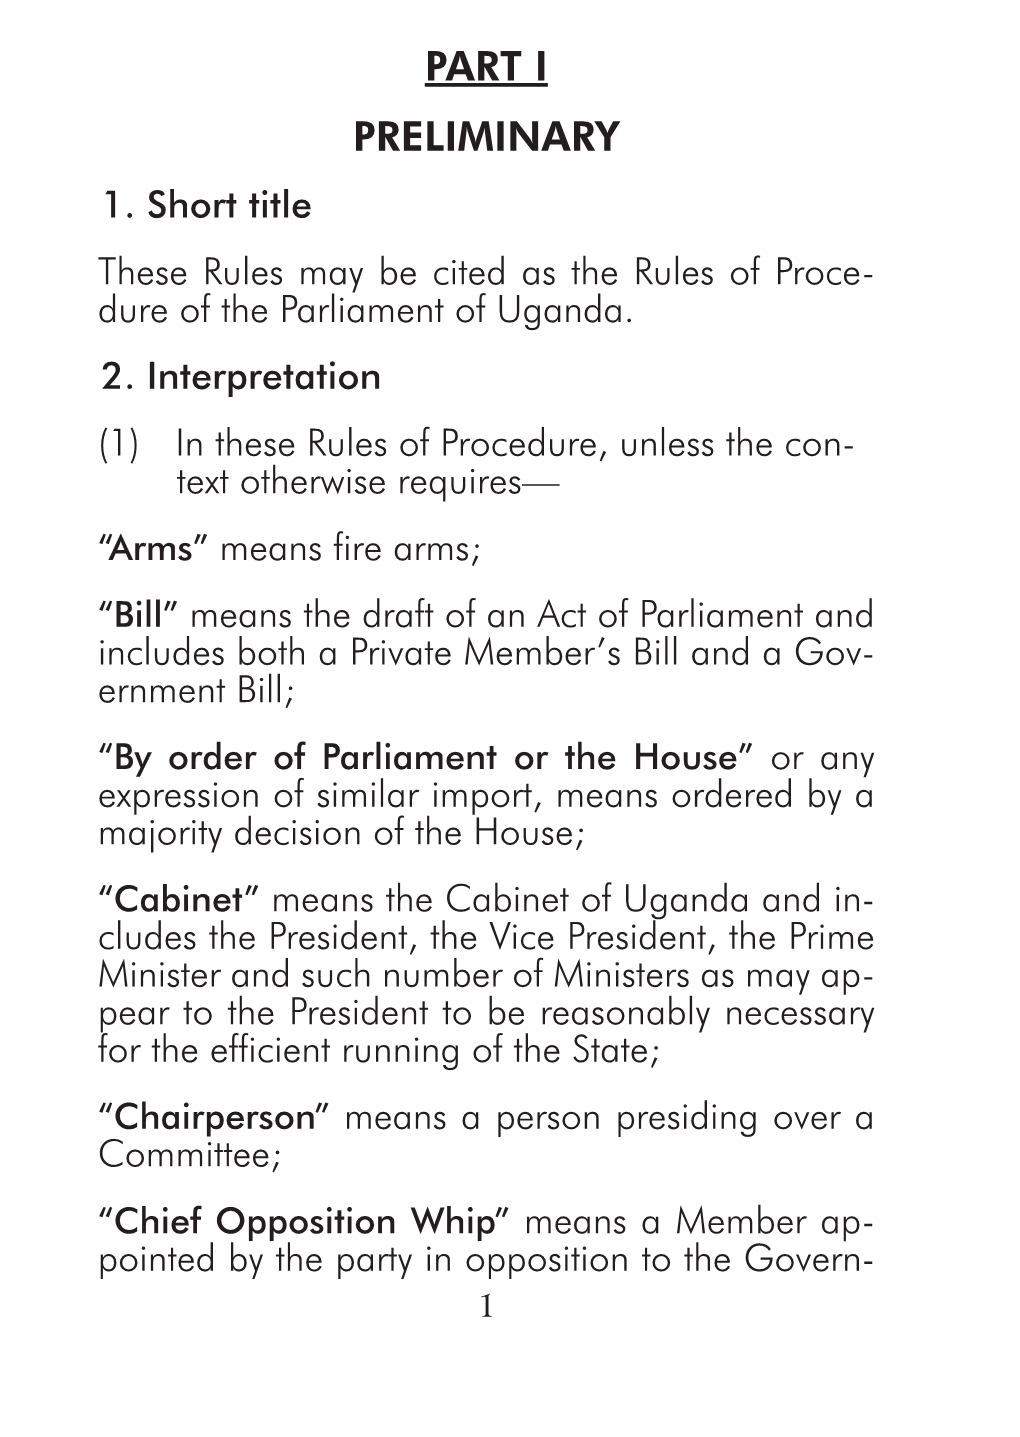 Rules of Procedure of Parliament